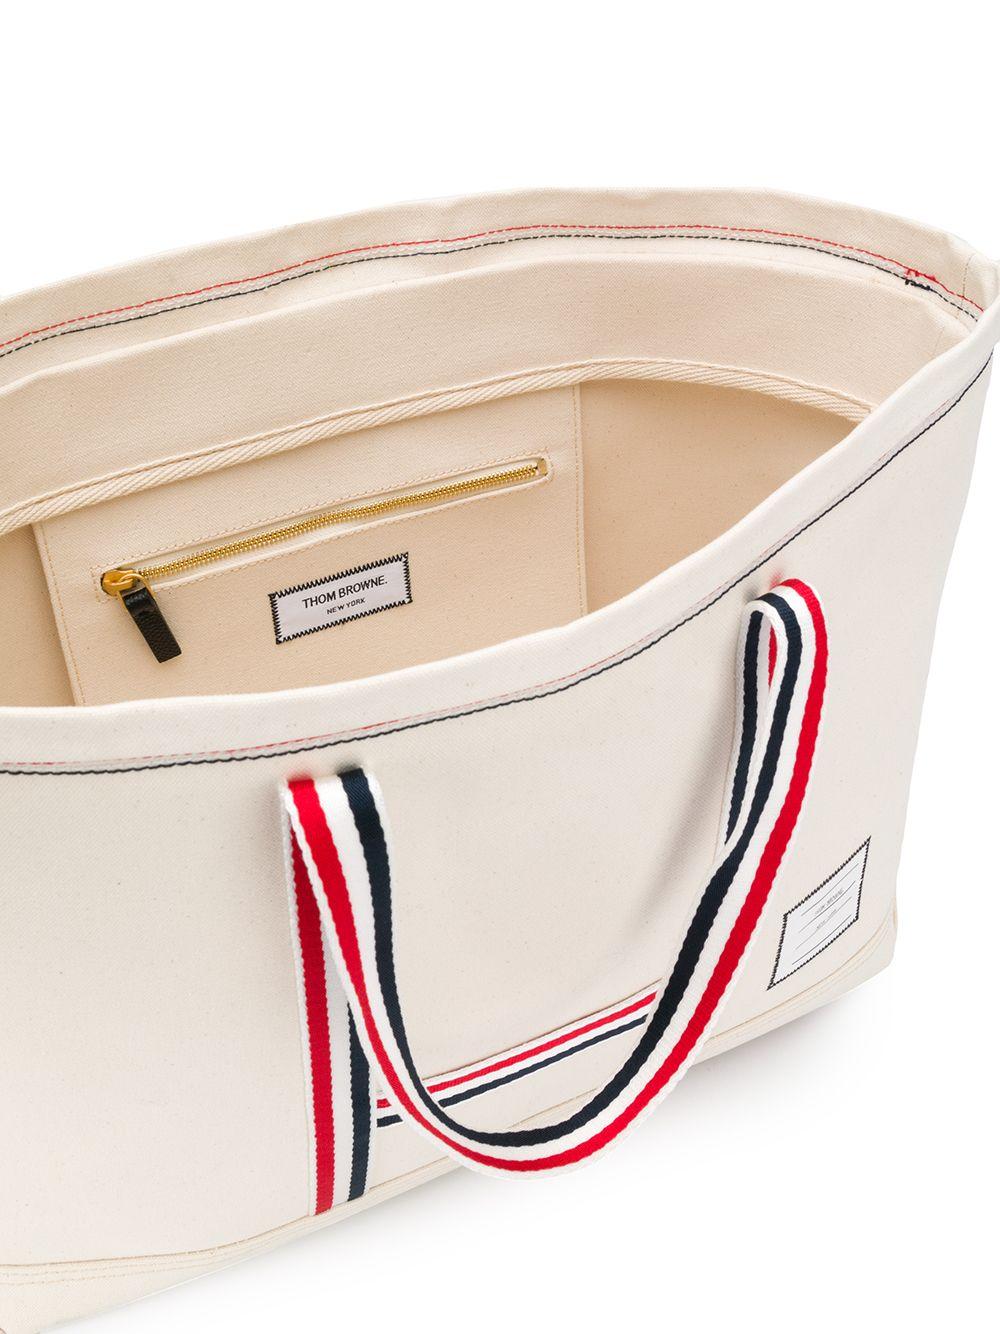 Thom Browne Medium Tool Canvas Tote Bag in White for Men - Lyst